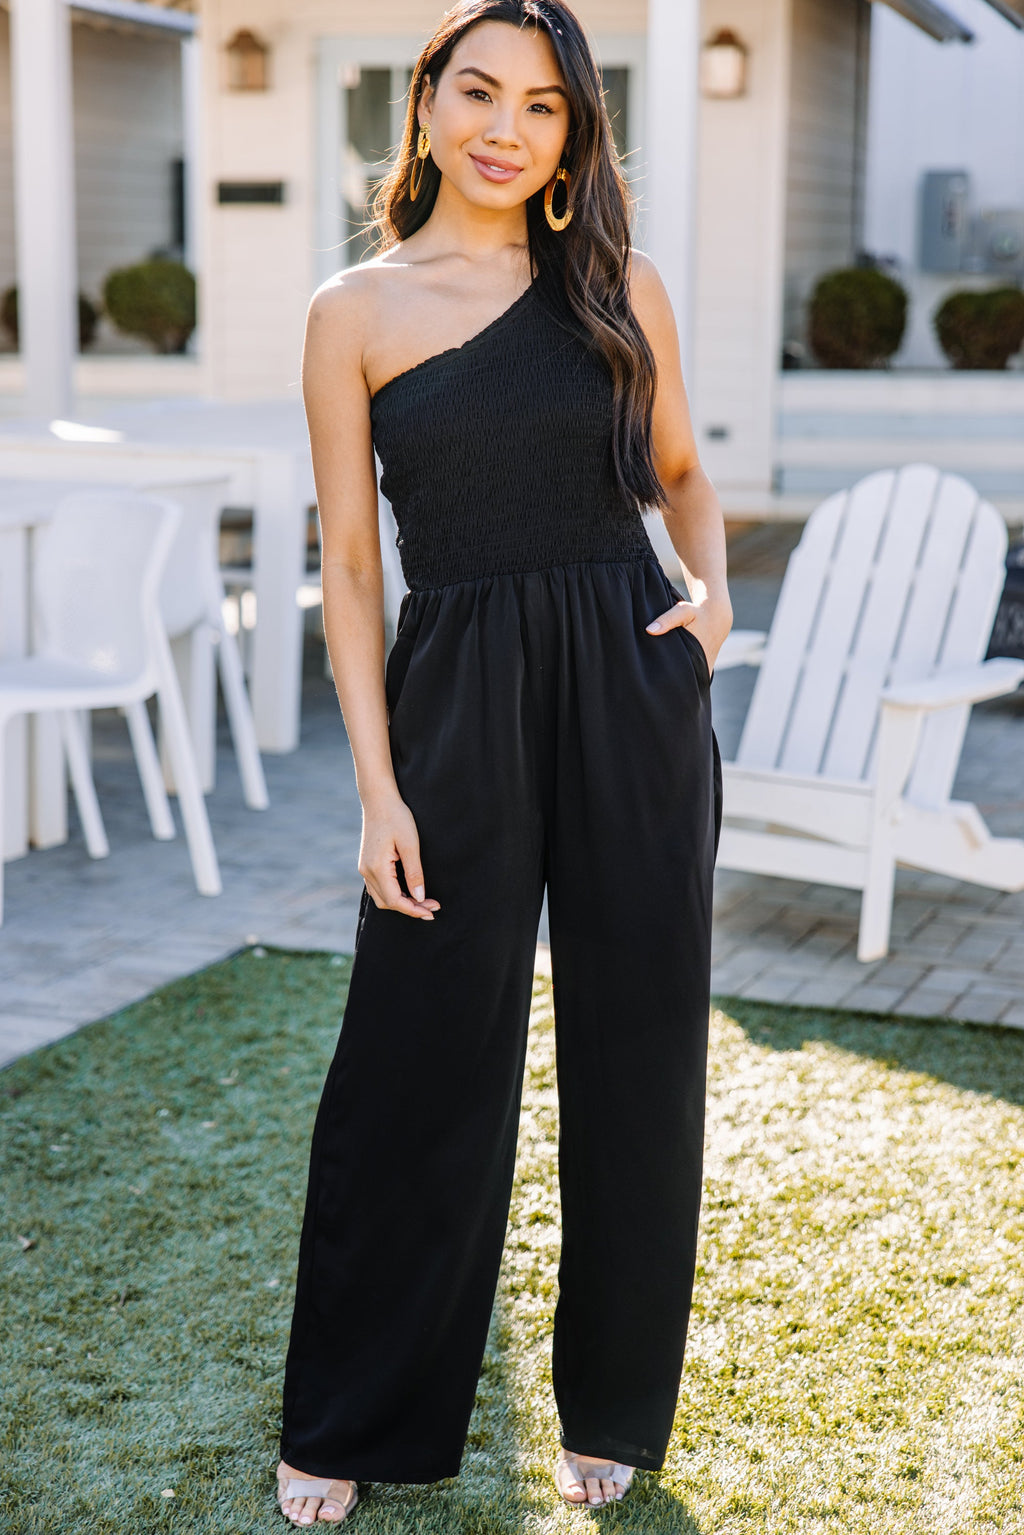 How To Style An Effortlessly Chic Jumpsuit Look | Windsor